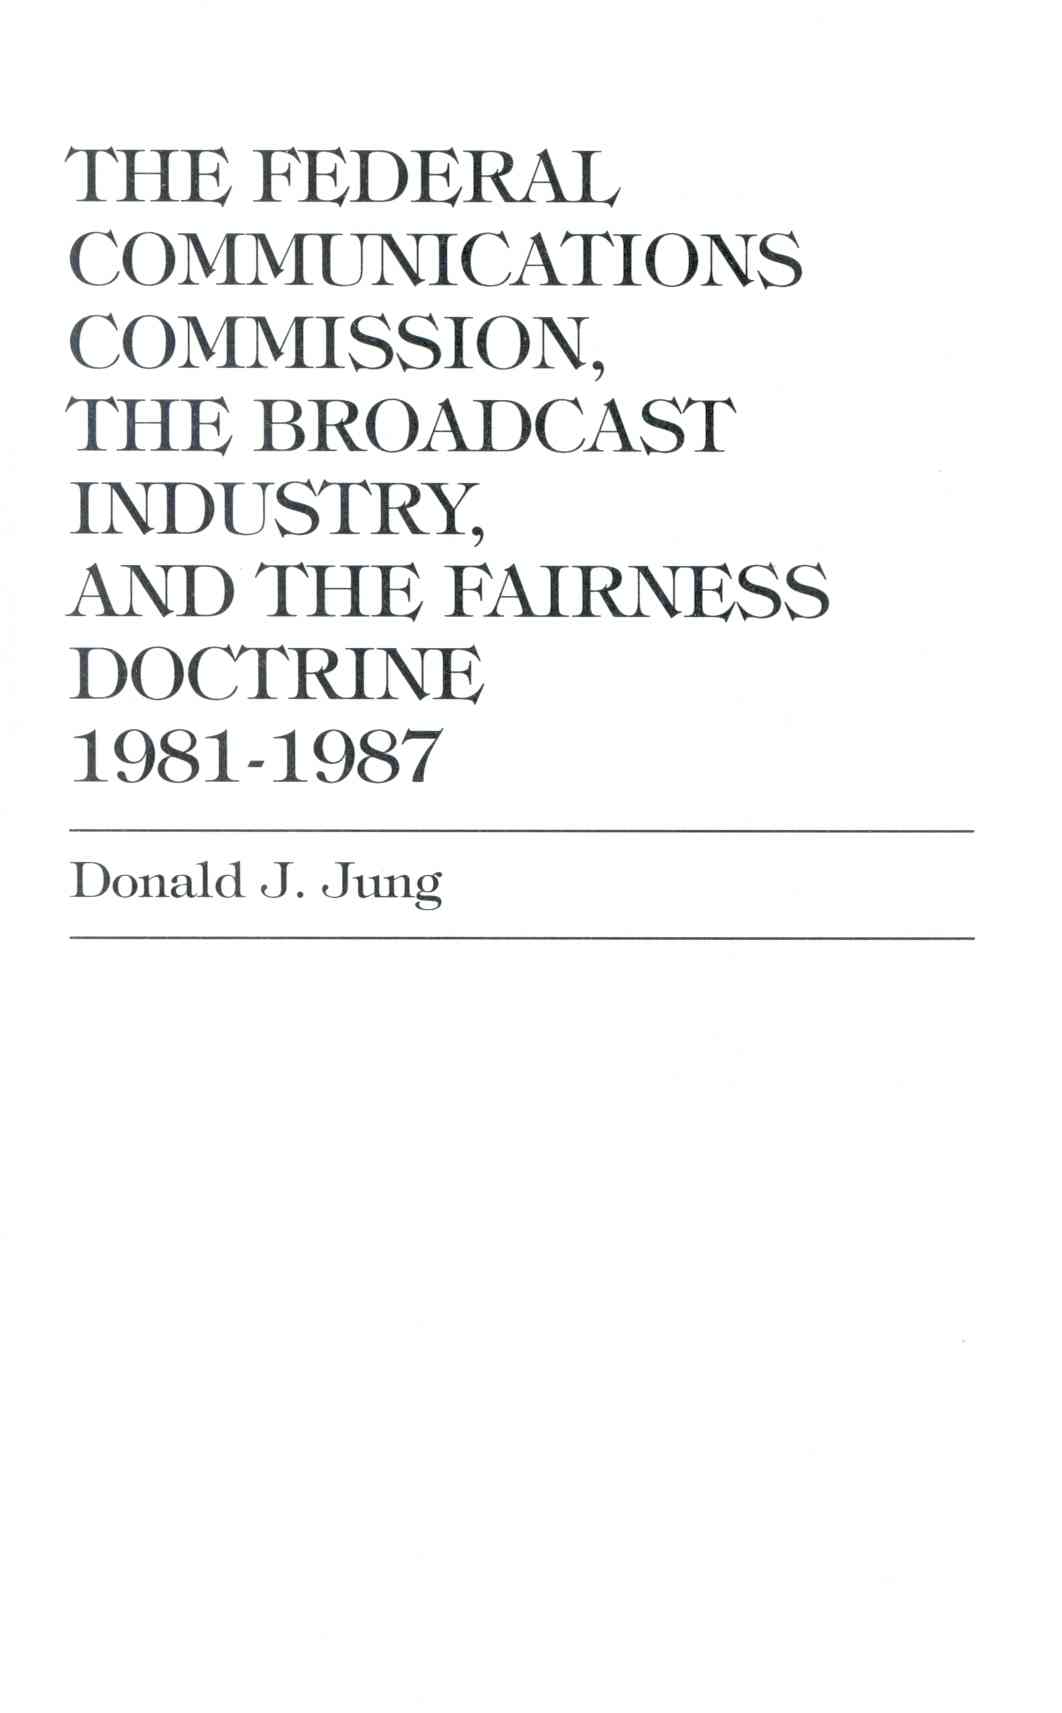 Federal Communications Commission, the Broadcast Industry, and the Fairness Doctrine, 1981-1987 Paperback